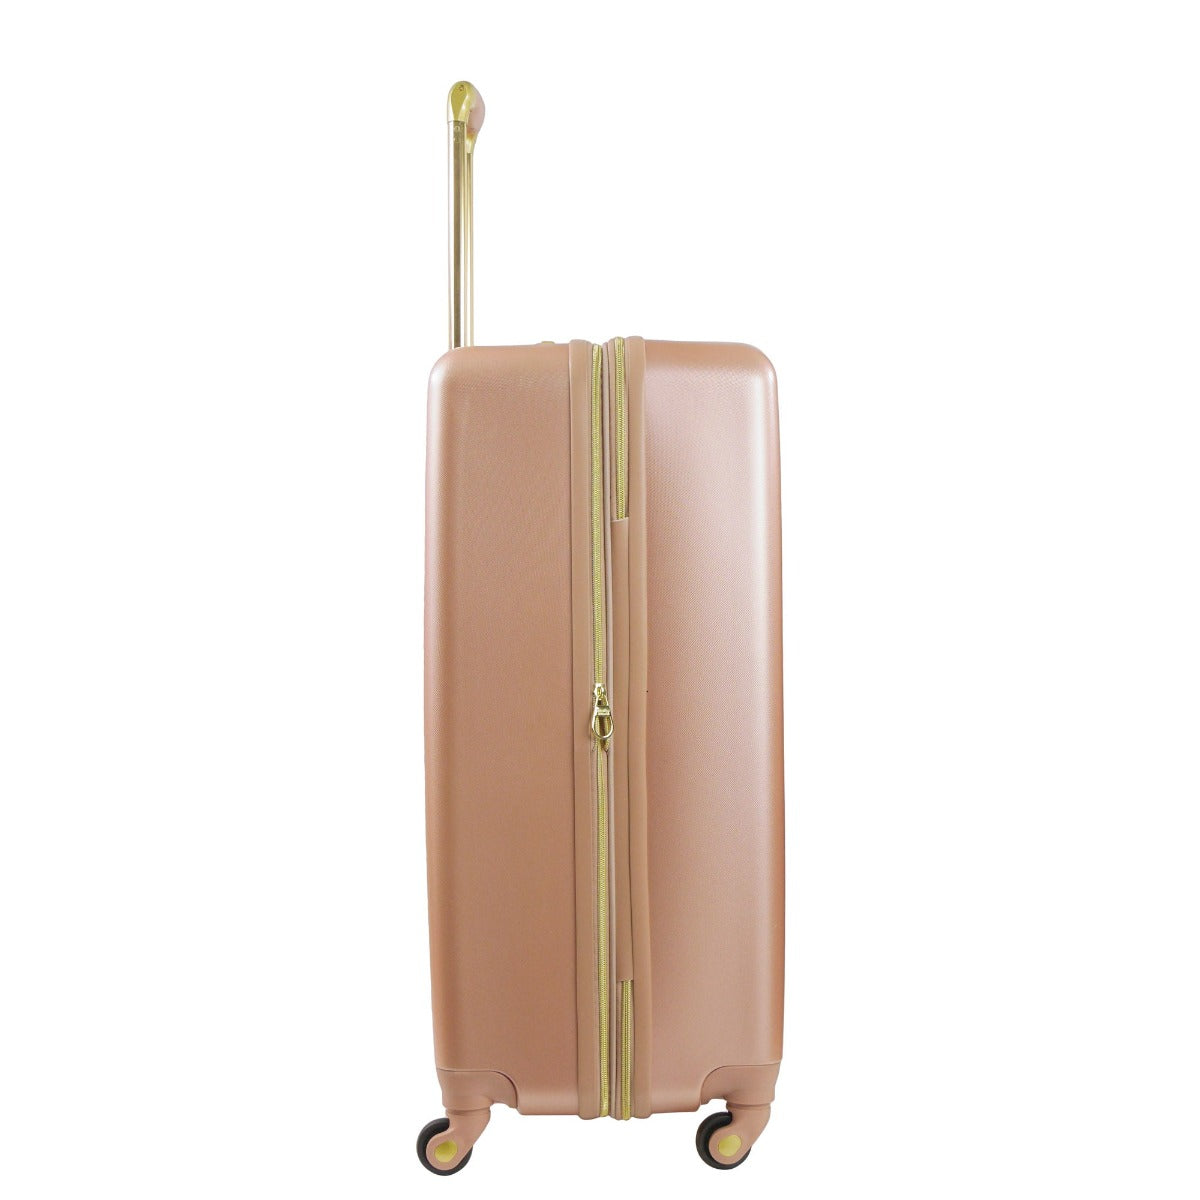 Christian Siriano Addie 29 inch hardside spinner checked luggage rose gold - best durable checked suitcase